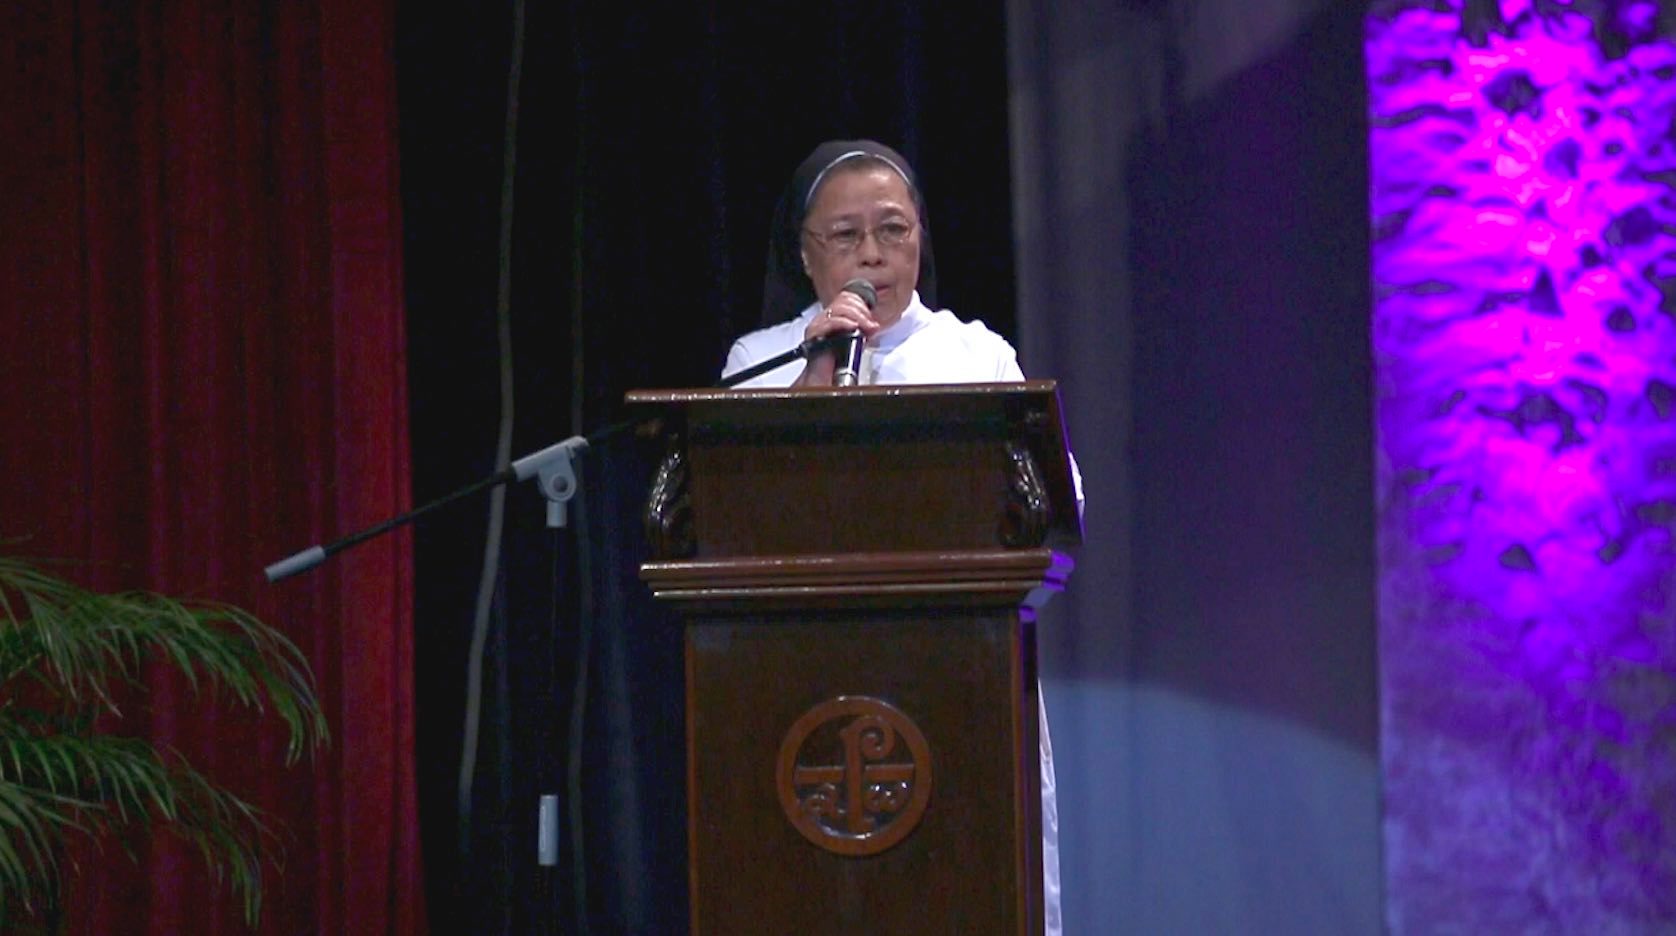 IN SOLIDARITY. St. Scholastica College's Vice President of External Affairs and Director of the Institute of Women's Studies Sister Mary John Mananzan delivers the opening remarks at the 13th Hildegarde Awards in St. Scholastica's College on April 24, 2019.